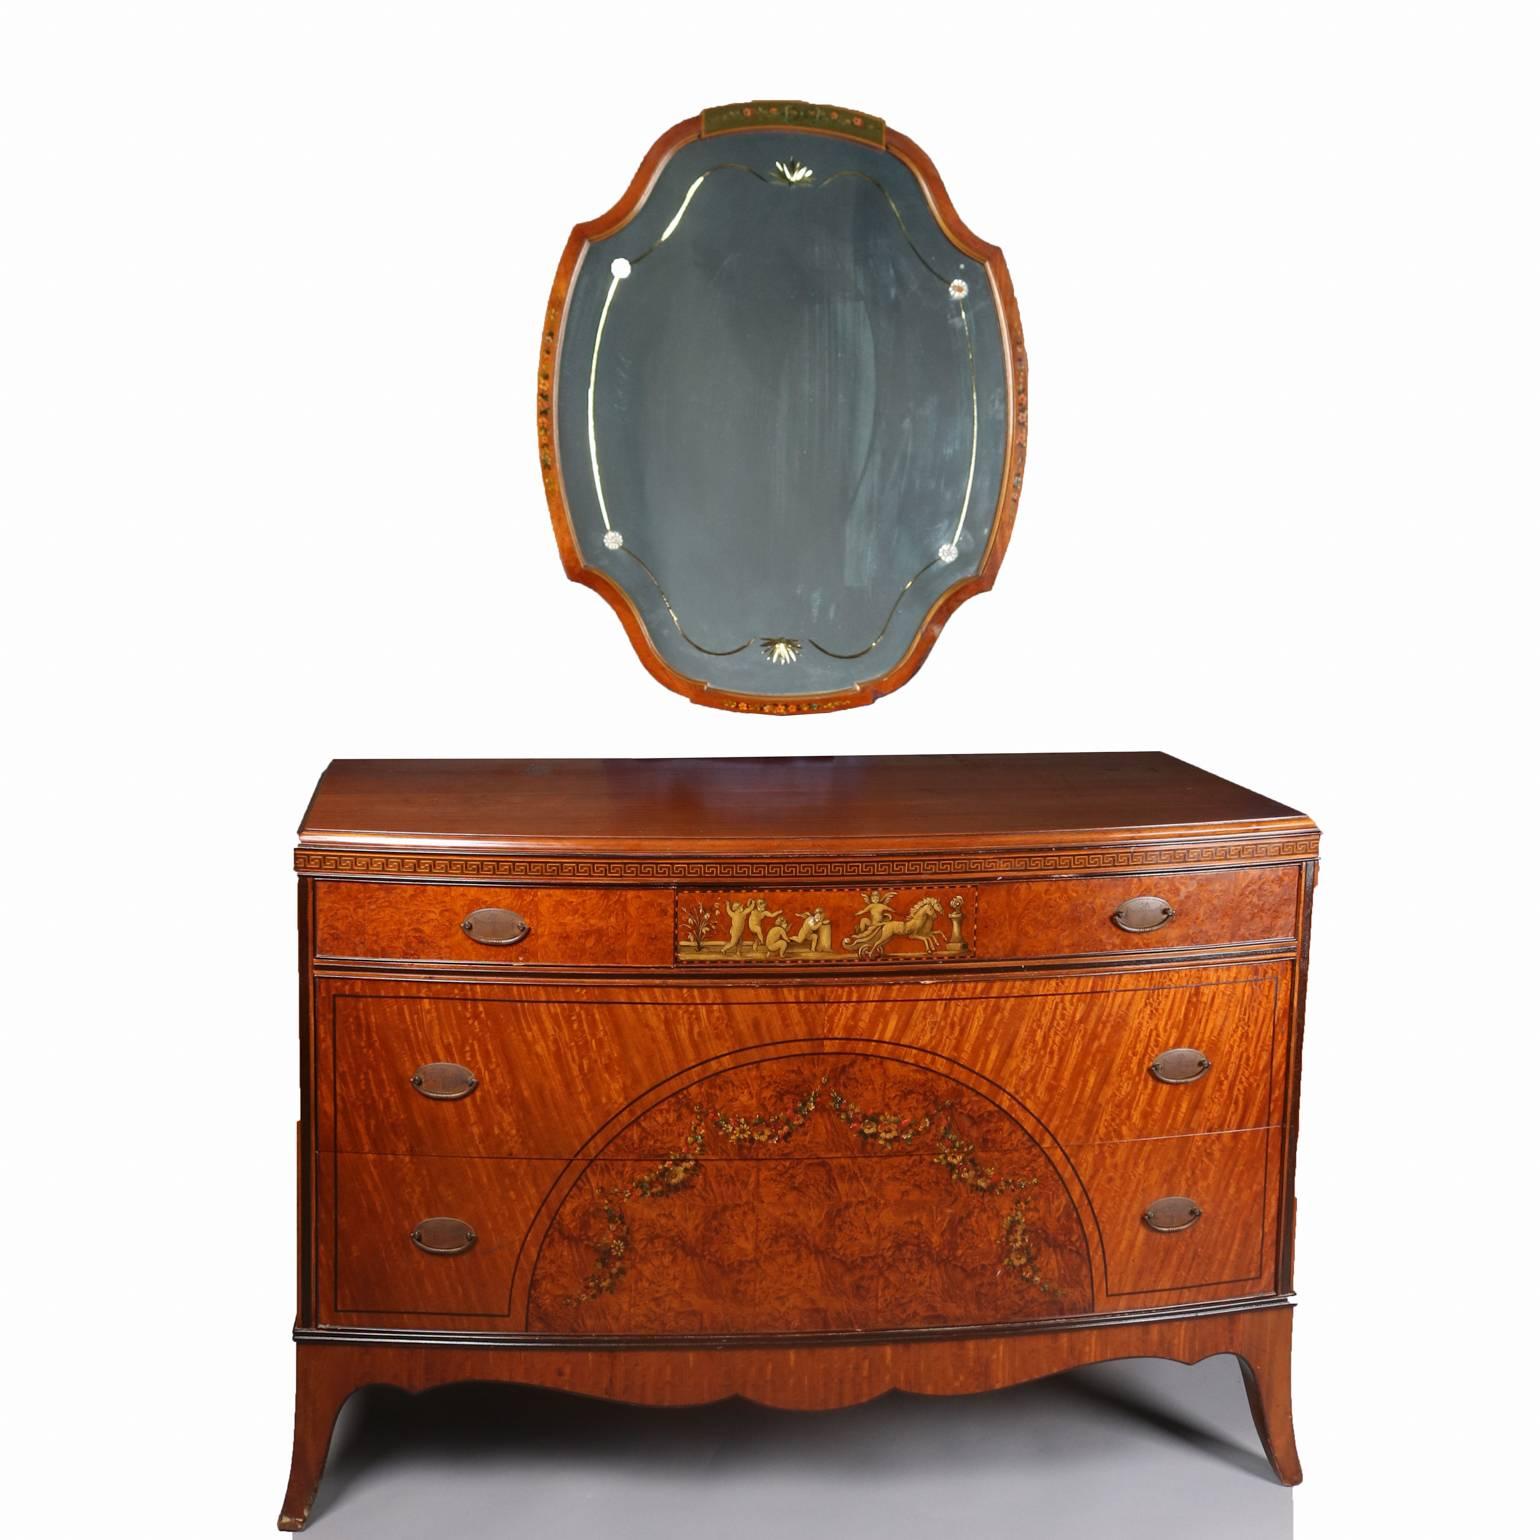 Antique and fine Adam style satinwood mirrored low chest features deep striations throughout with ebonized and inlaid Greek key banding, accenting hand-painted floral sprays and central Classical cherubi scenes, floral etching on mirror, bronze